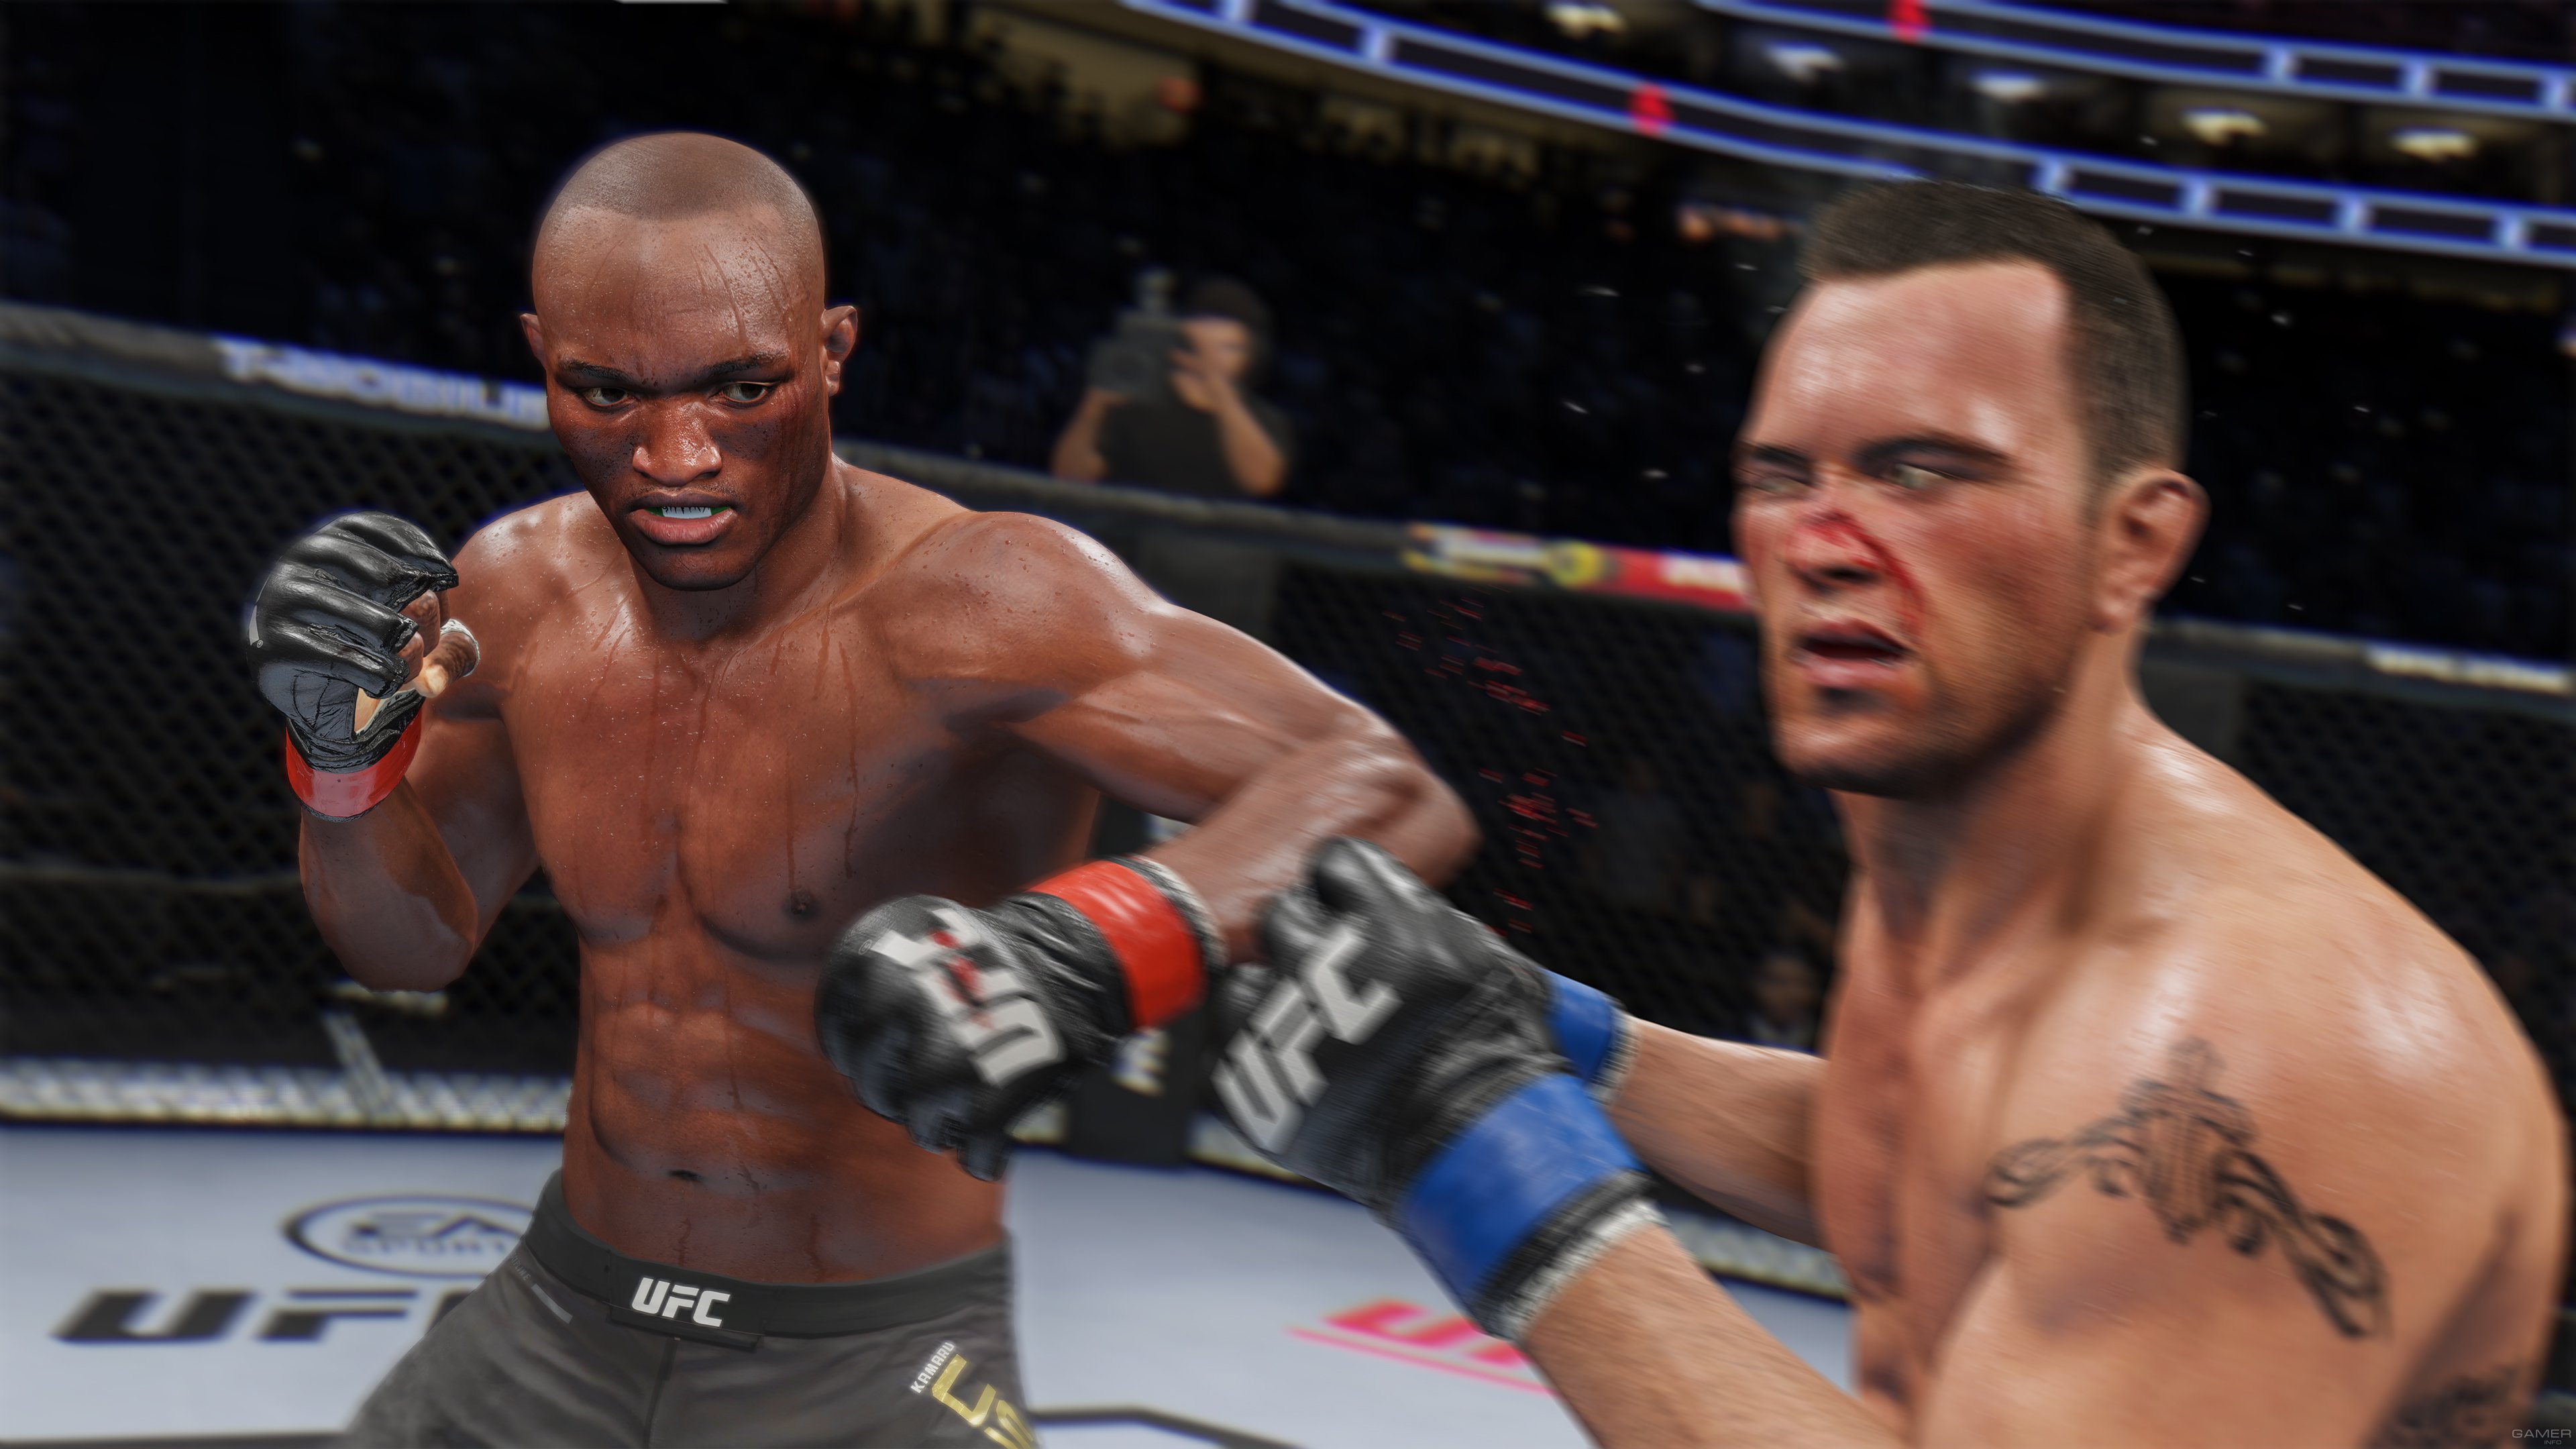 download ea sports ufc game for pc